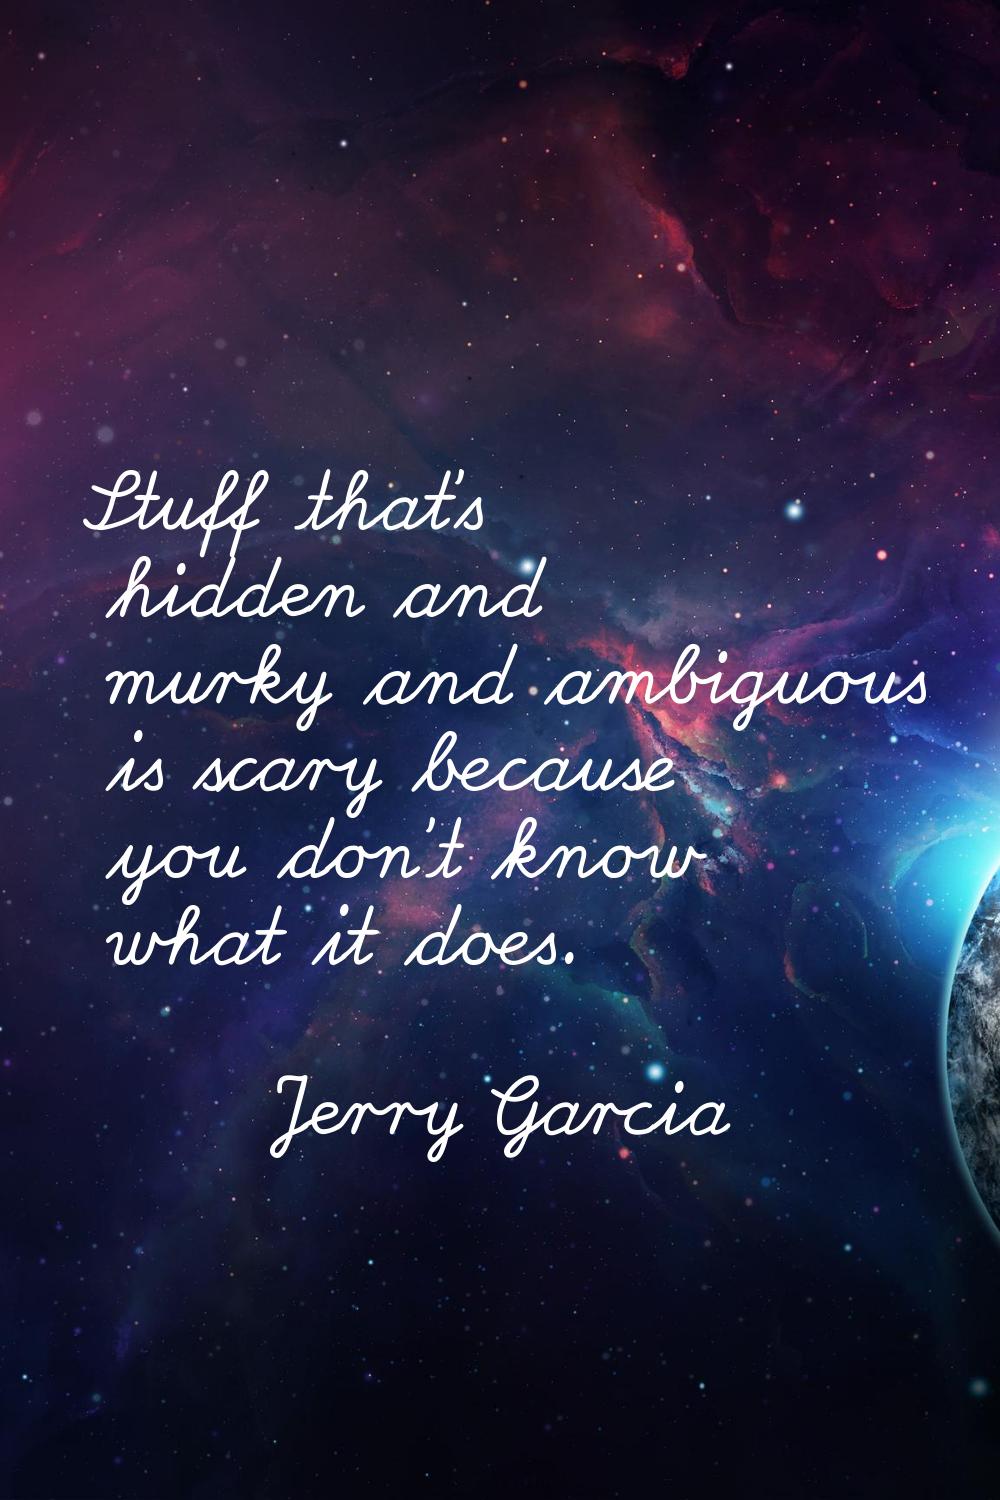 Stuff that's hidden and murky and ambiguous is scary because you don't know what it does.